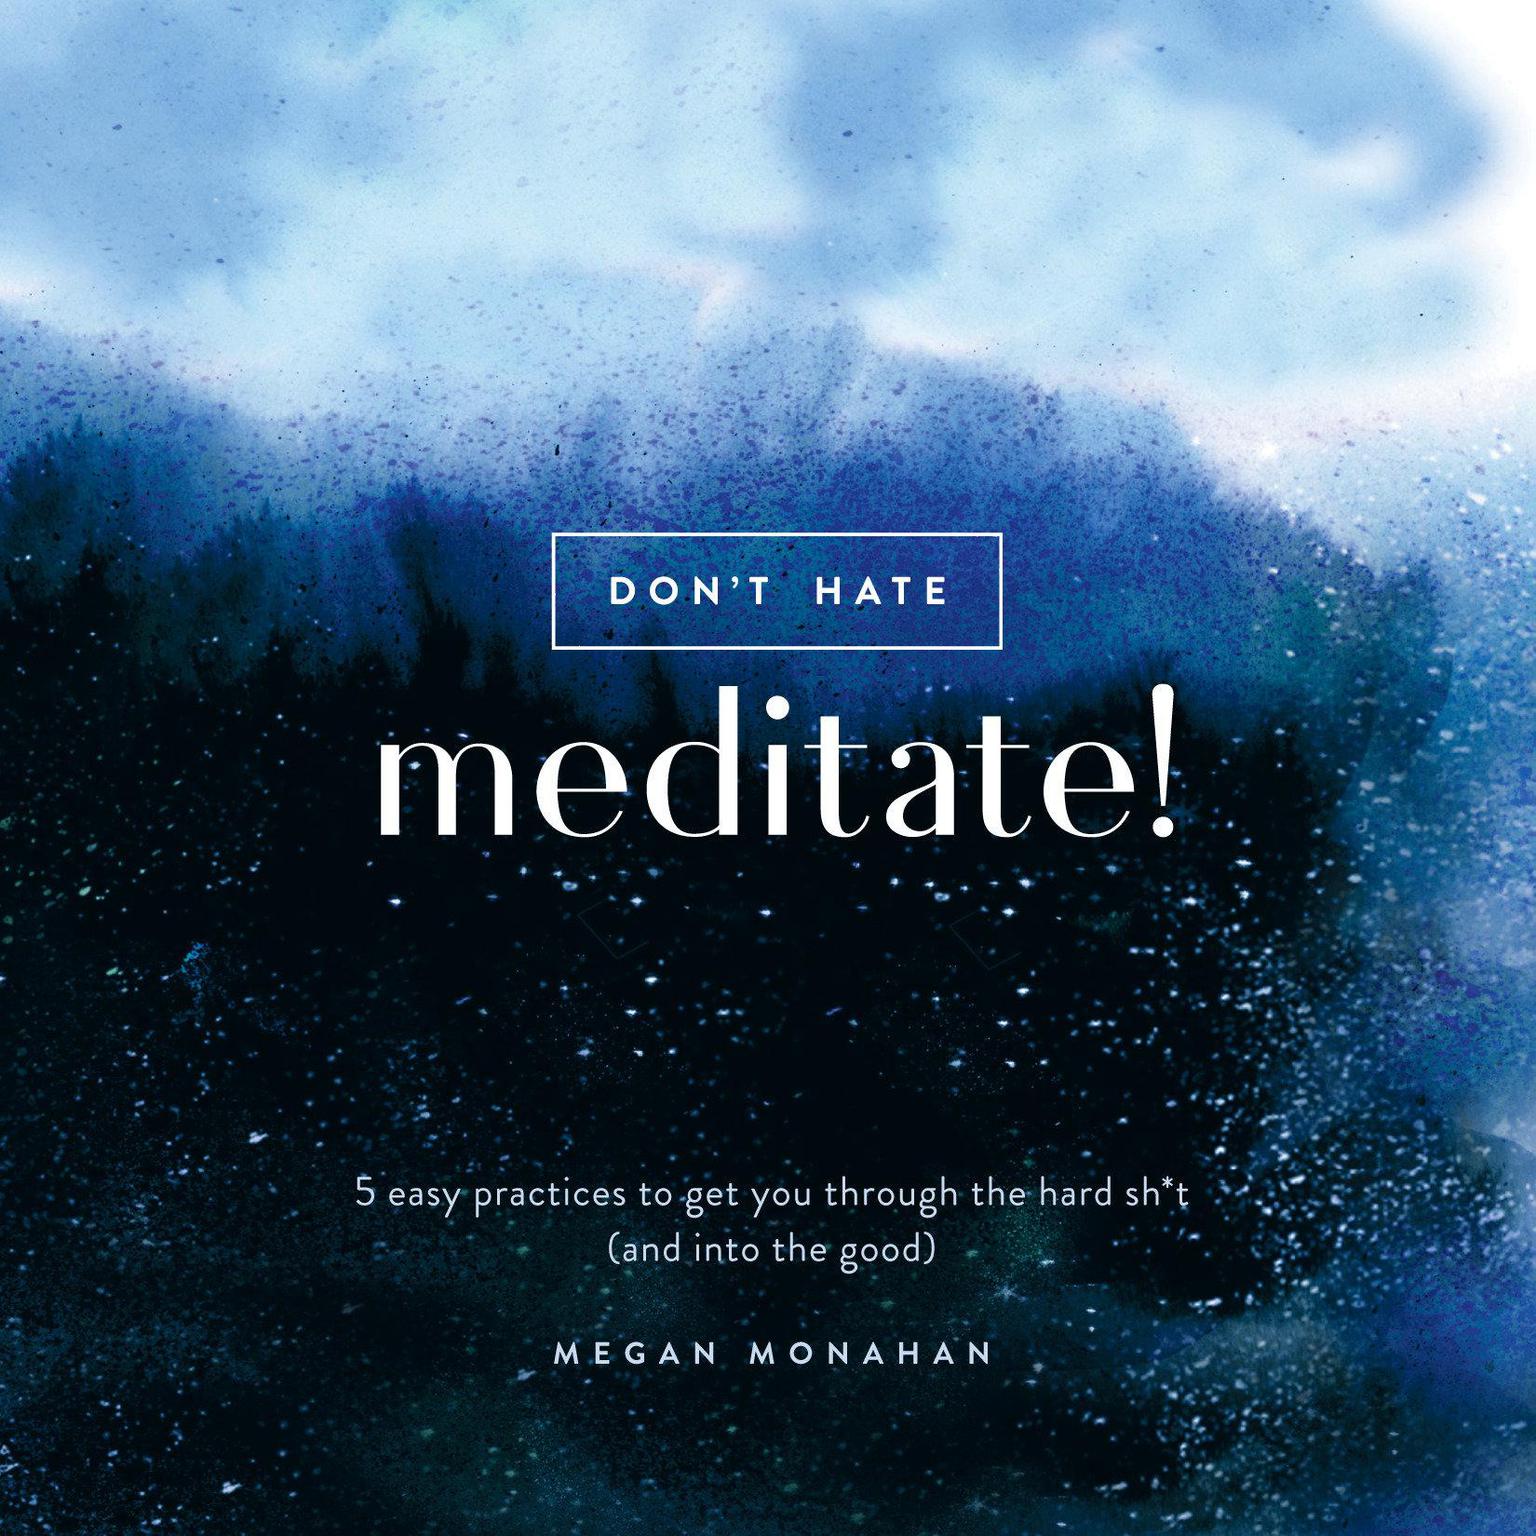 Dont Hate, Meditate!: 5 Easy Practices to Get You Through the Hard Sh*t (and into the Good) Audiobook, by Megan Monahan